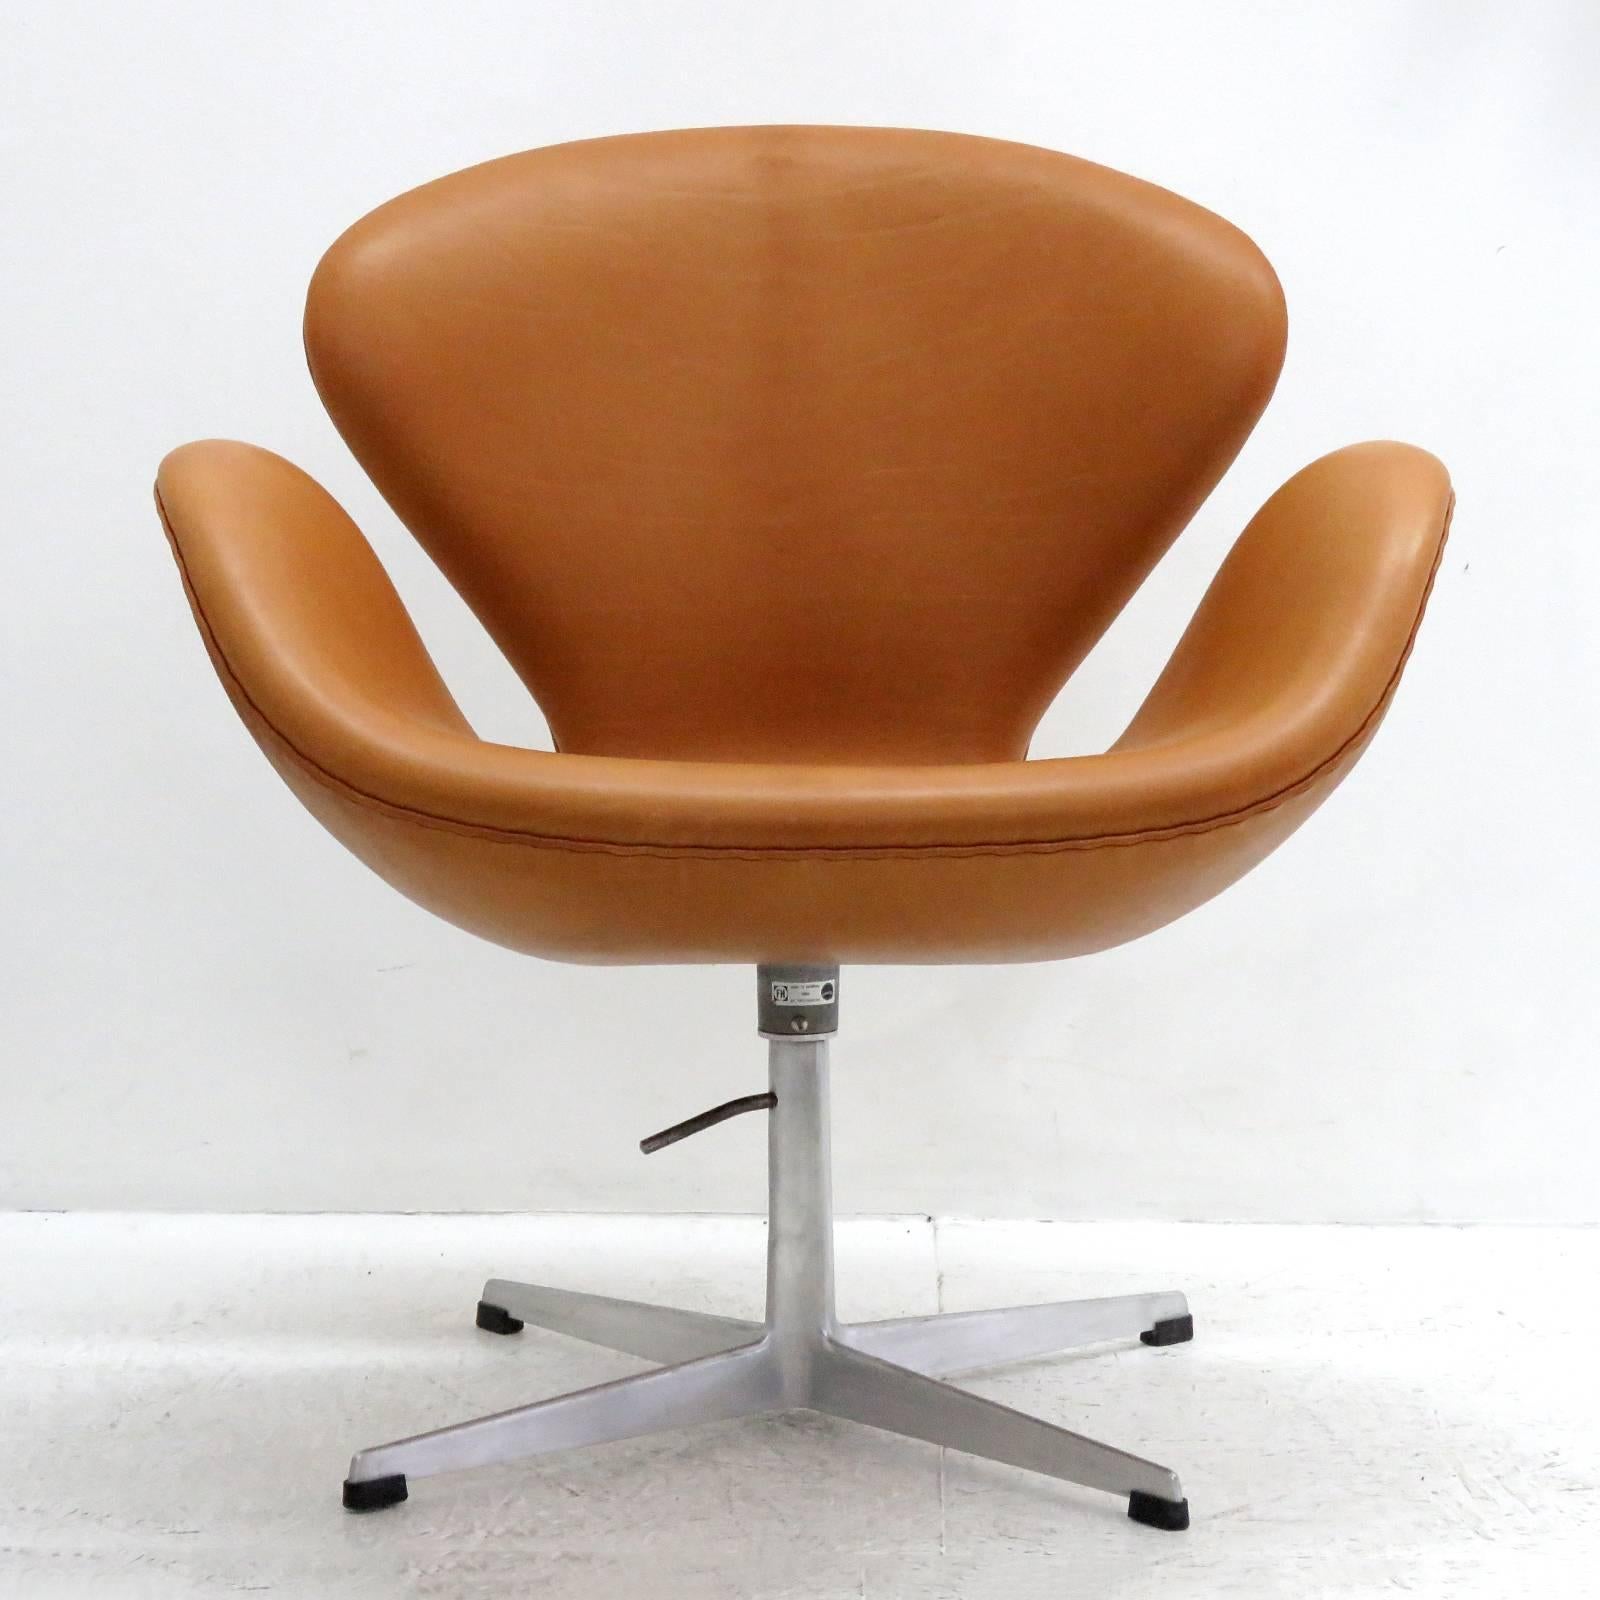 stunning 'Swan' chair, early model 3320, by Arne Jacobsen, lounge chair on a height adjustable four-star aluminum base, upholstered in cognac range aniline leather, originally designed 1957-1958 for the Hotel Royal in Copenhagen, marked Fritz Hansen.